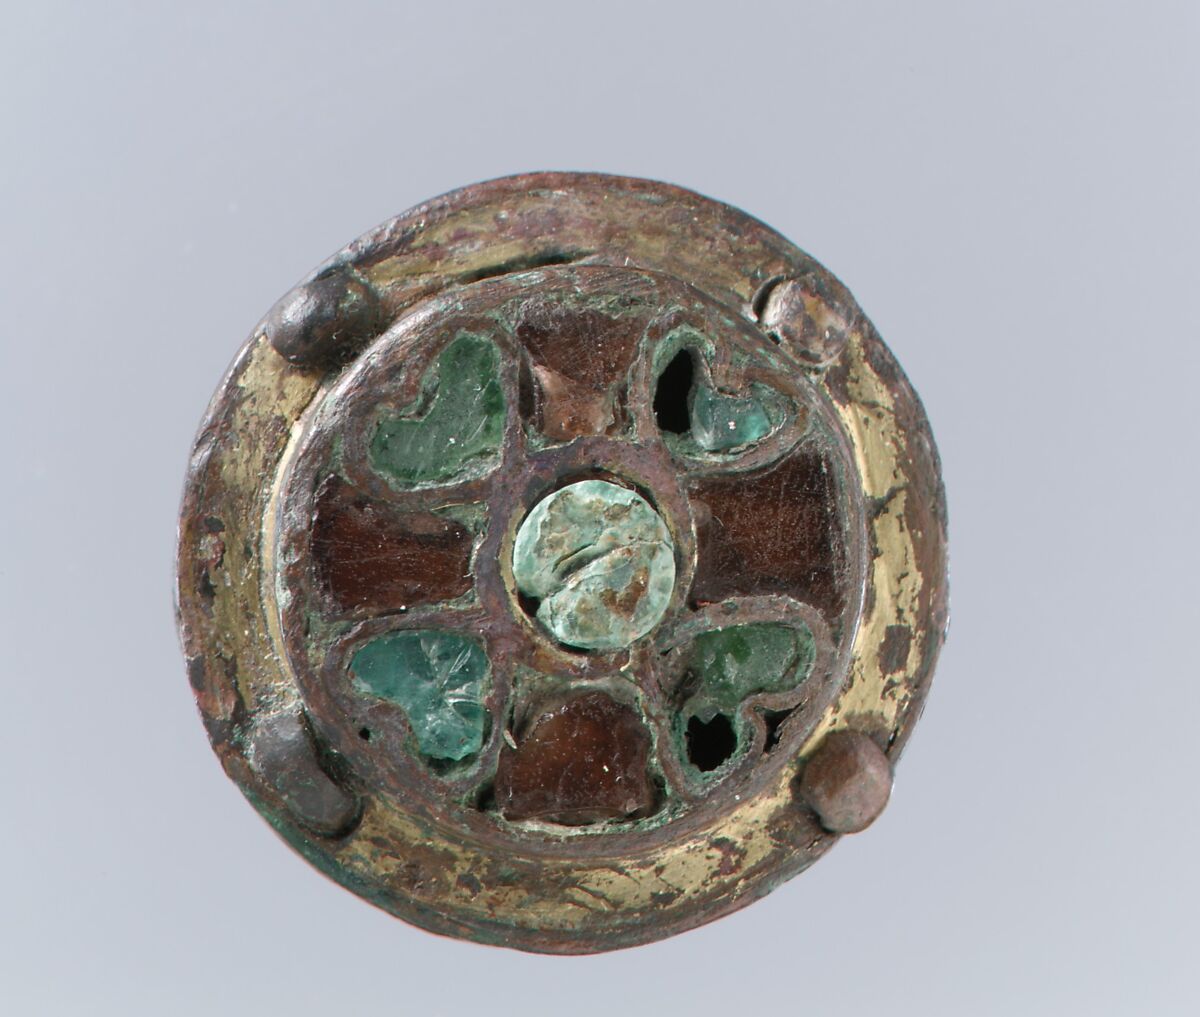 Disk Brooch, Copper alloy, gilded, mother-of-pear; garnets and green glass inlaid with silver foil backings; copper alloy back, no spring/pin extant, Frankish 